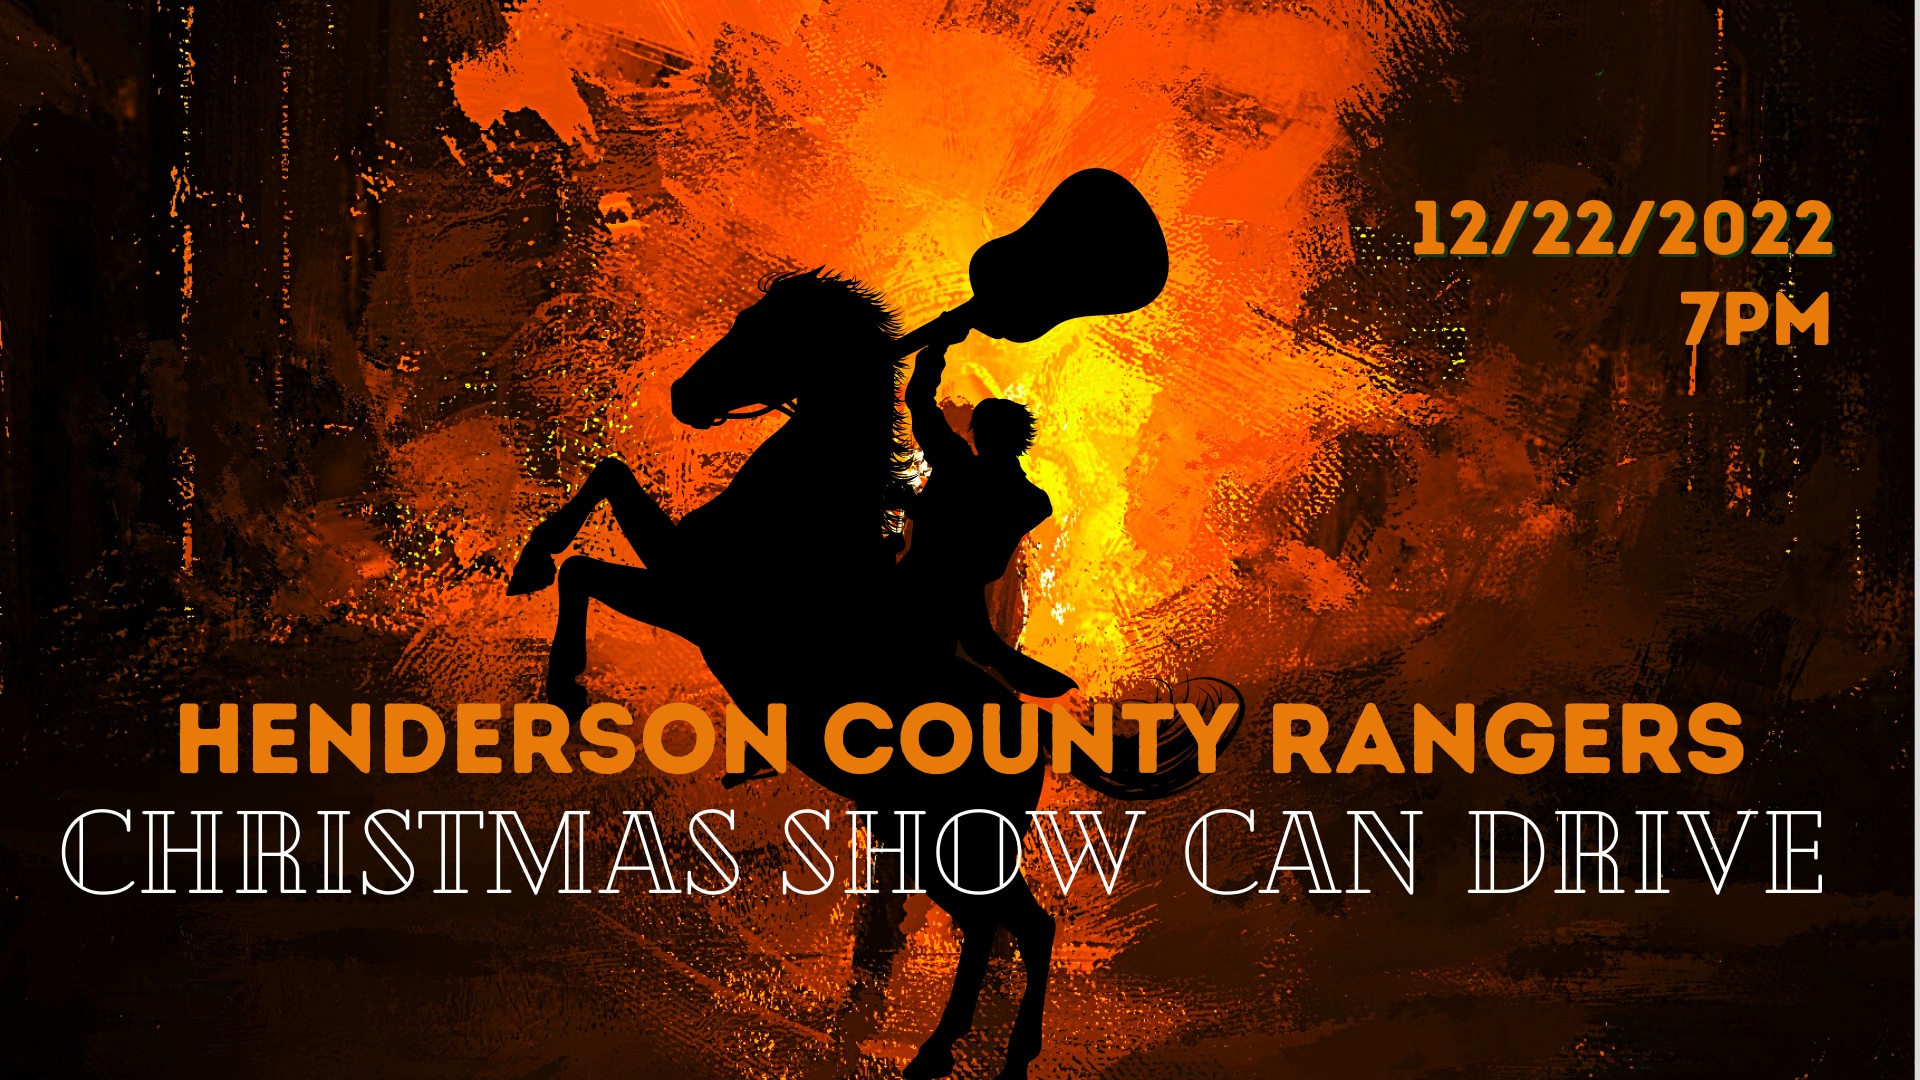 Henderson County Rangers Christmas Show Can Drive